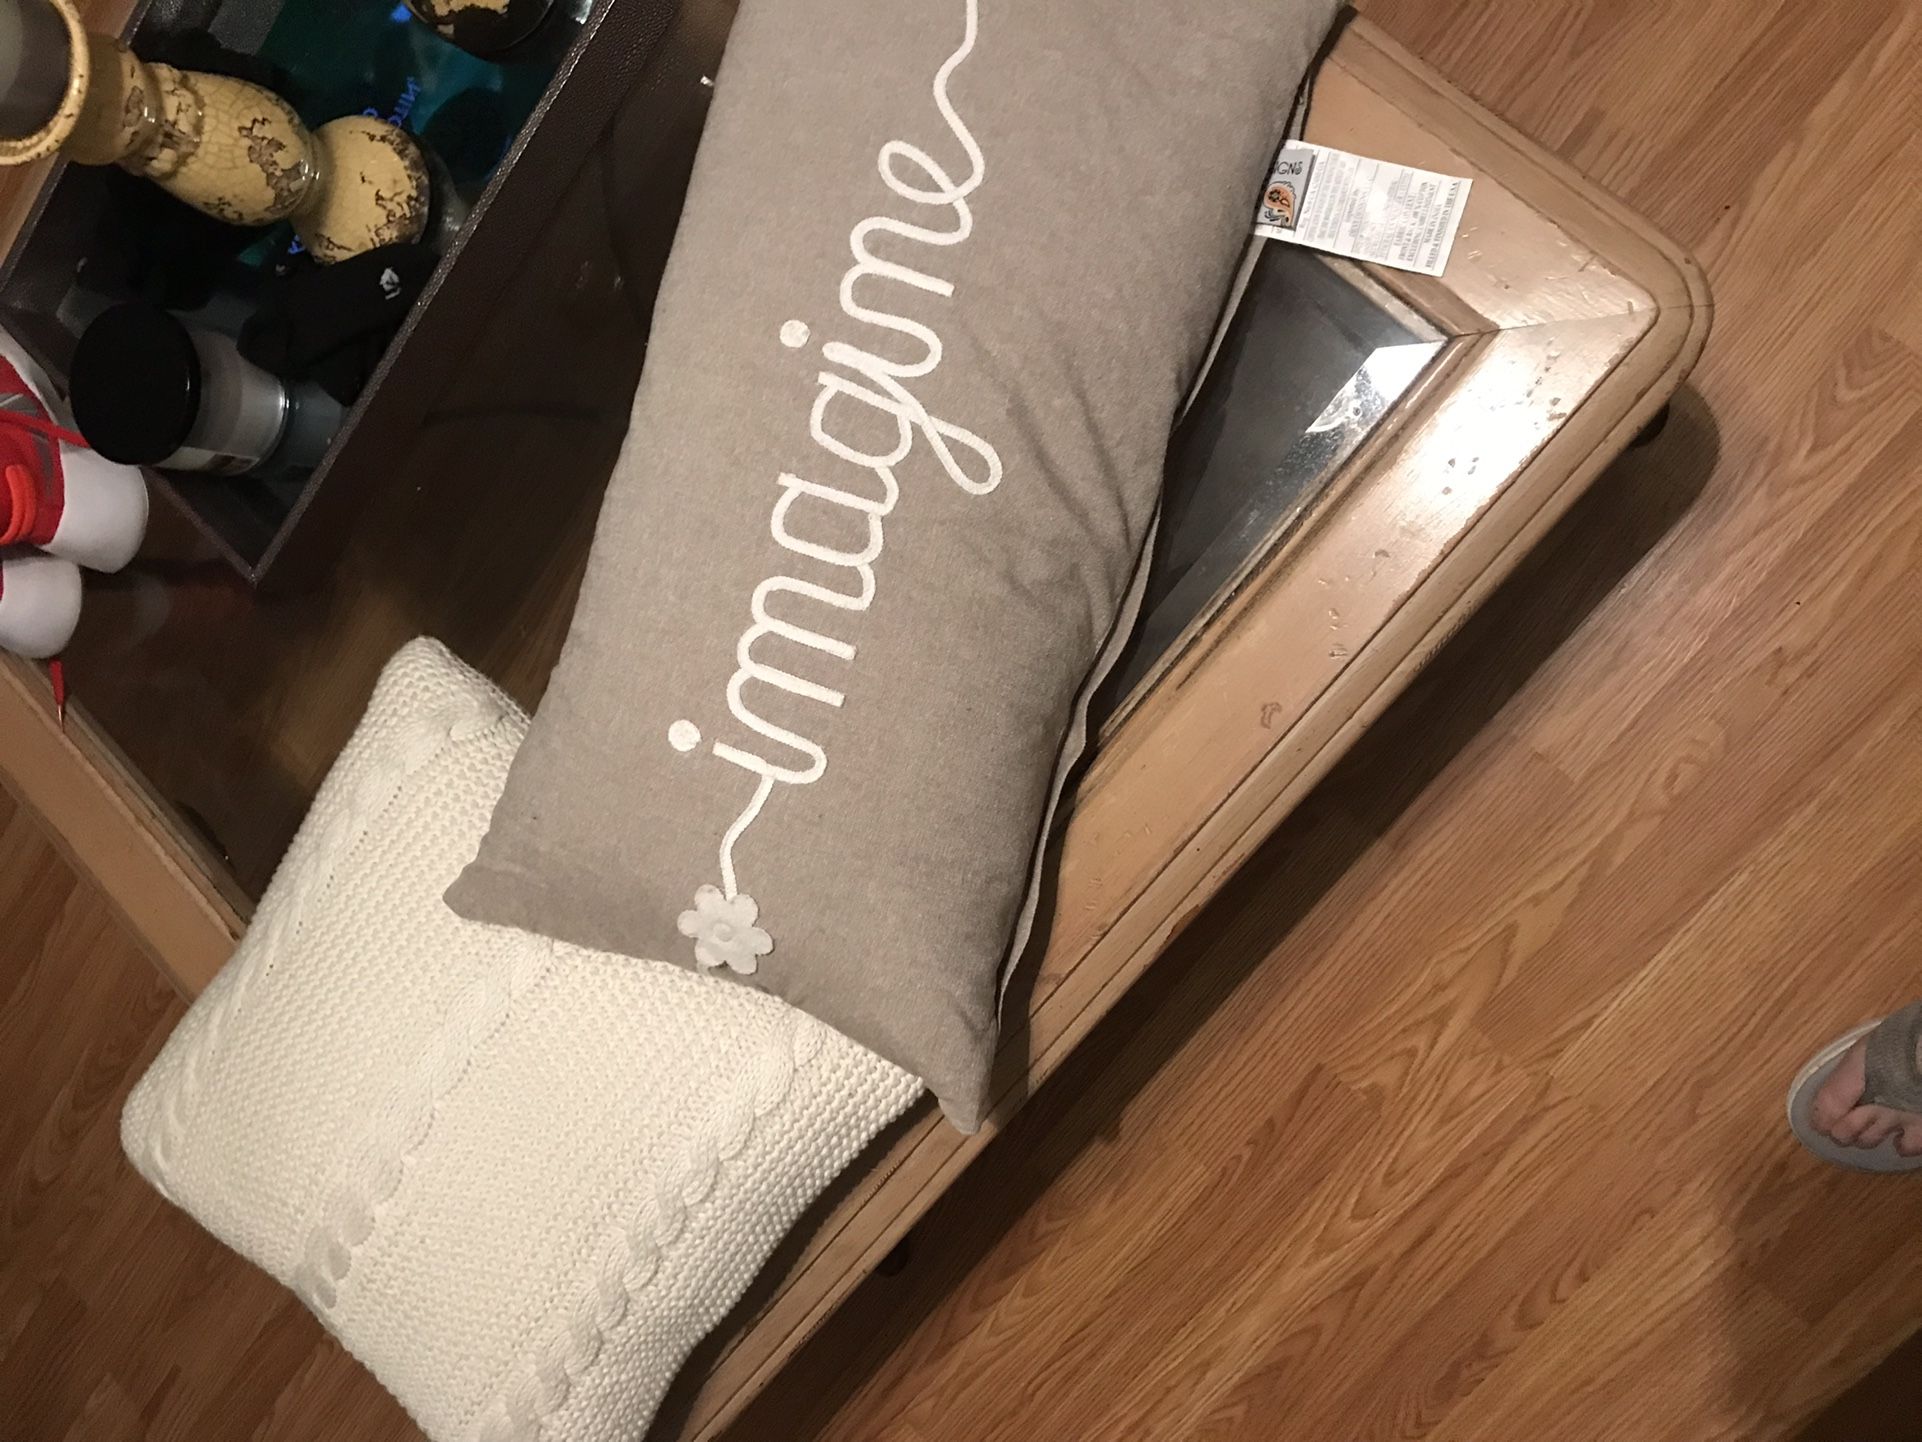 Pillows Both For $8